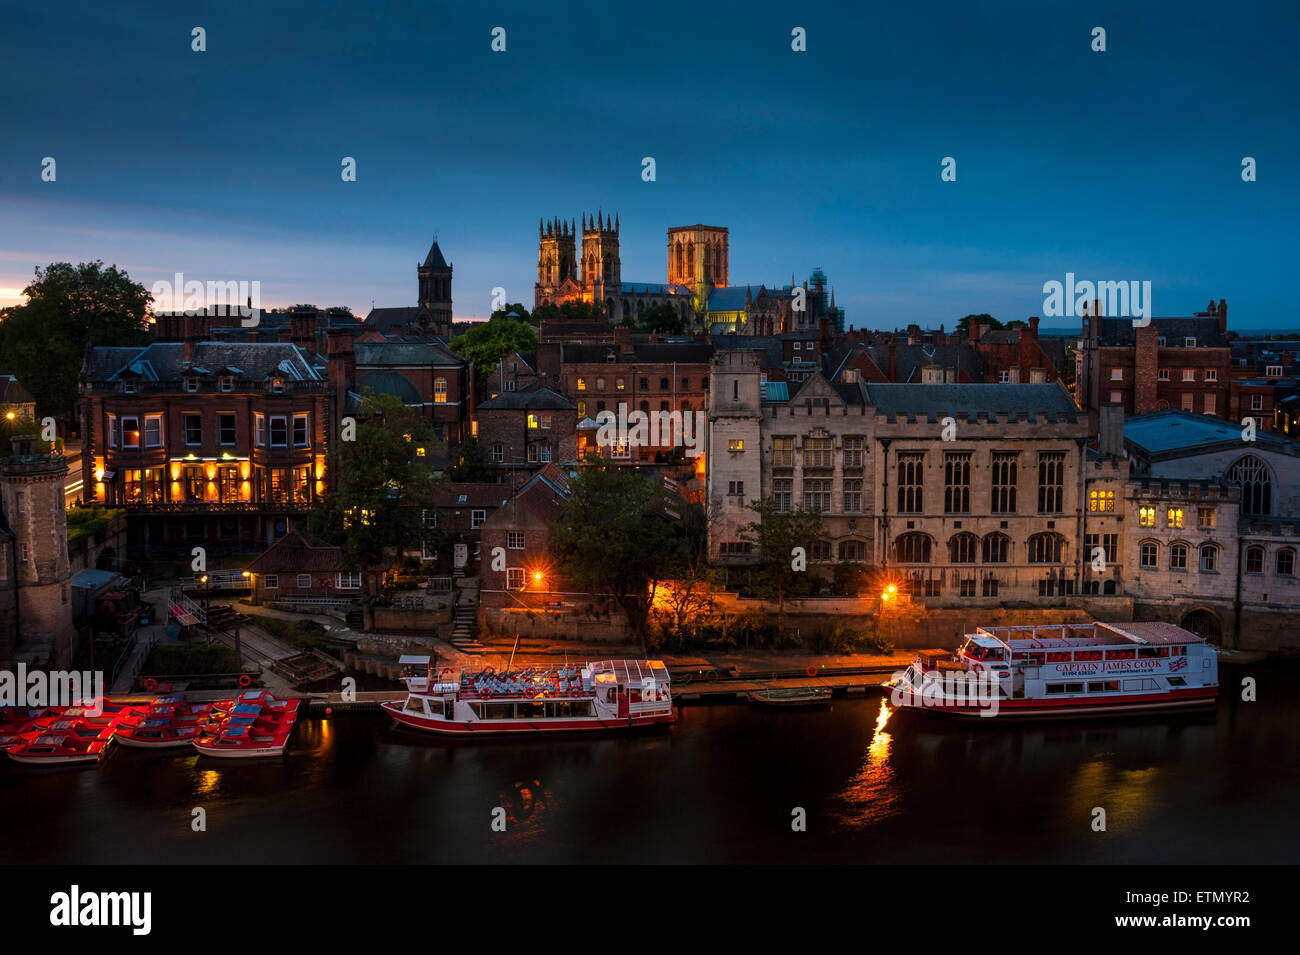 York Minster and River Ouse, York, UK, at sunset. Stock Photo